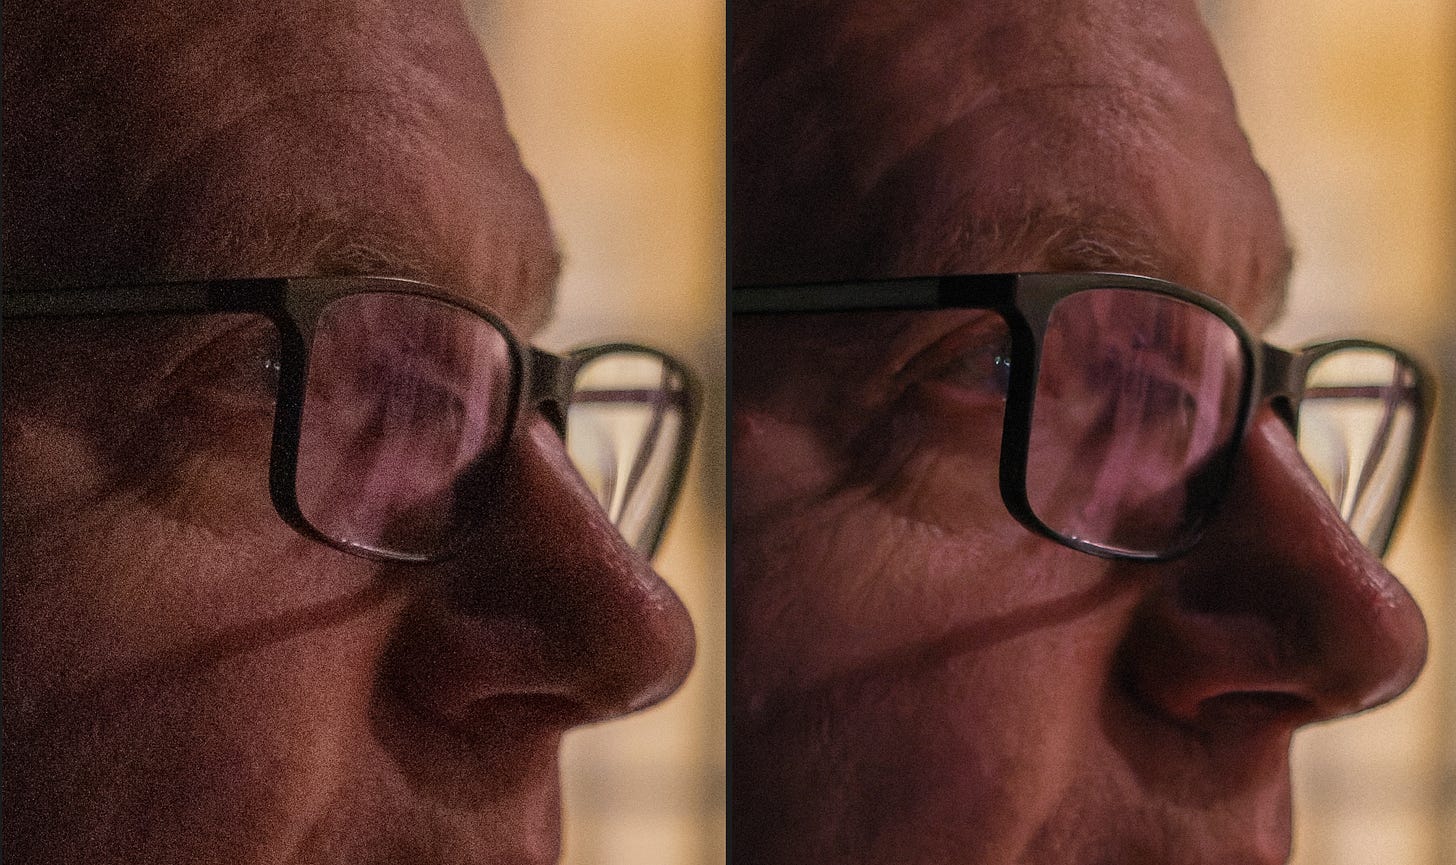 Side-by-side comparison of a zoomed in picture of a man, with just his nose, glasses, and forehead visible. The left image exhibits more digital noise than the processed image on the right.